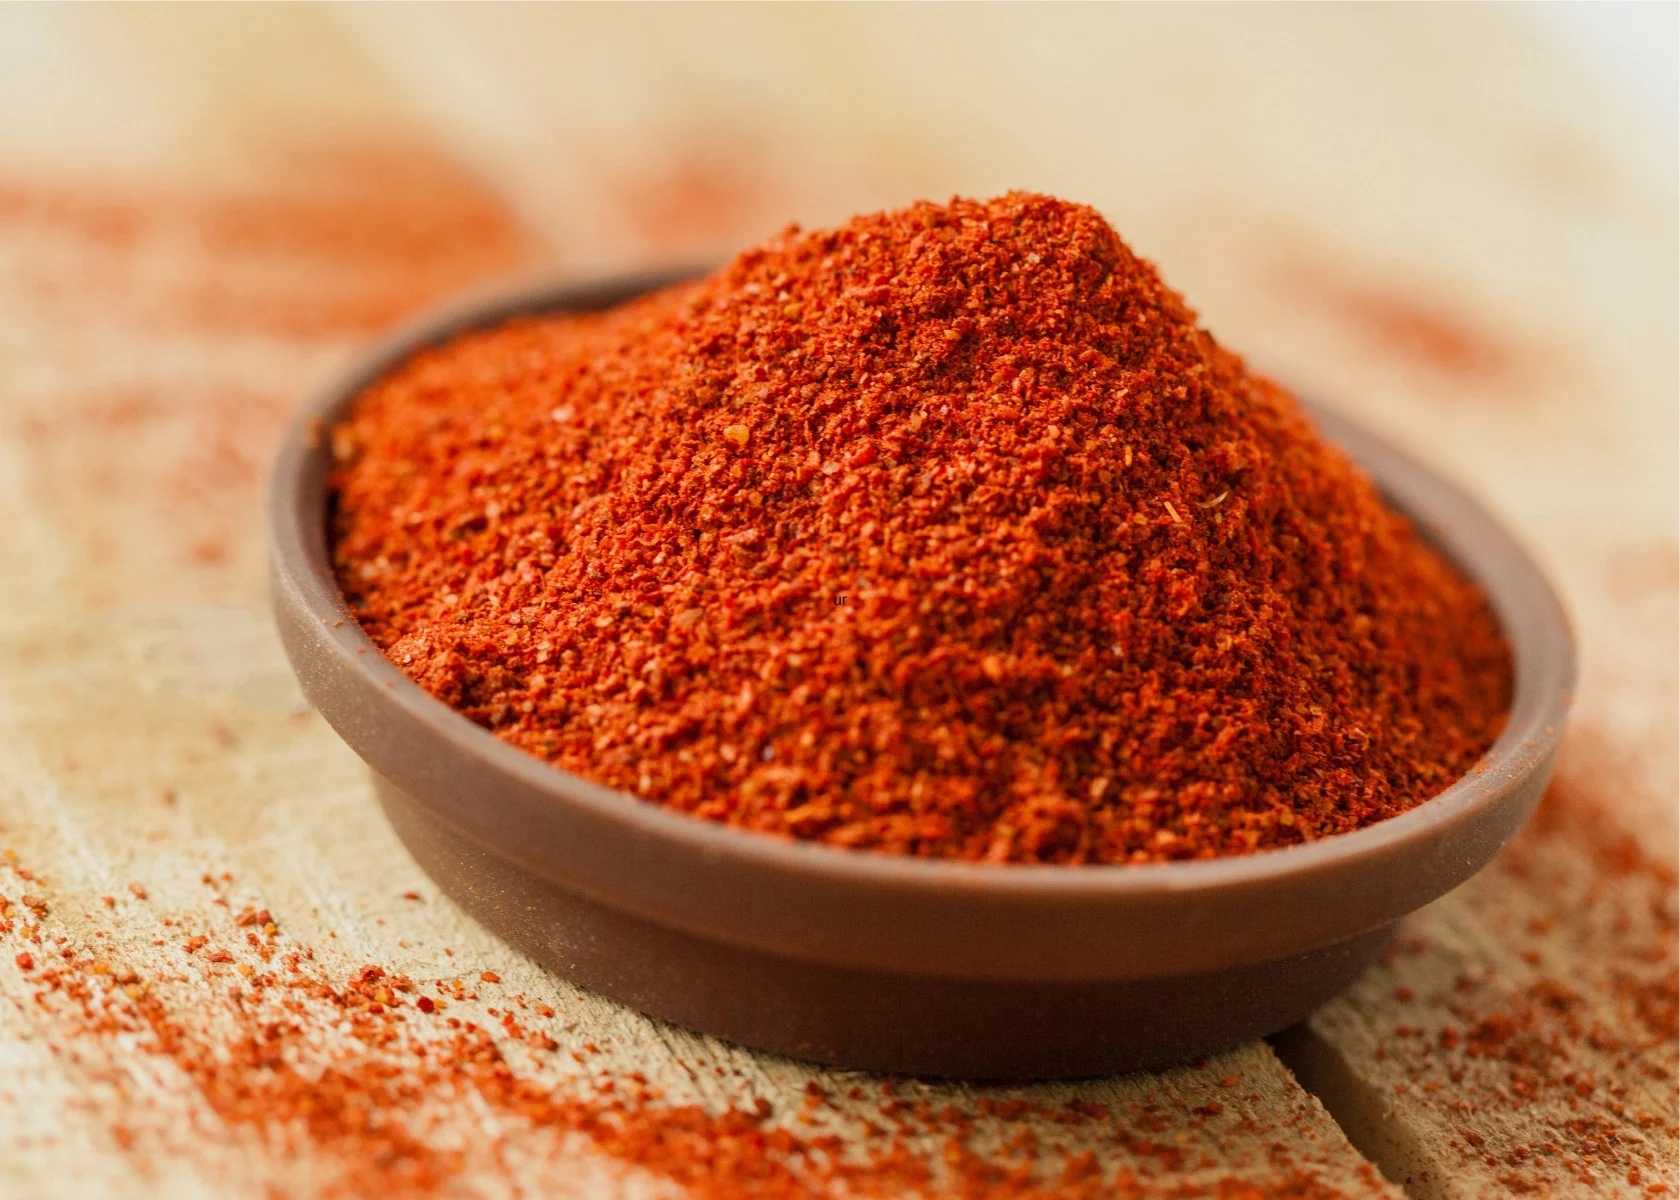 Large mound of cayenne pepper in small brown bowl on wooden table.